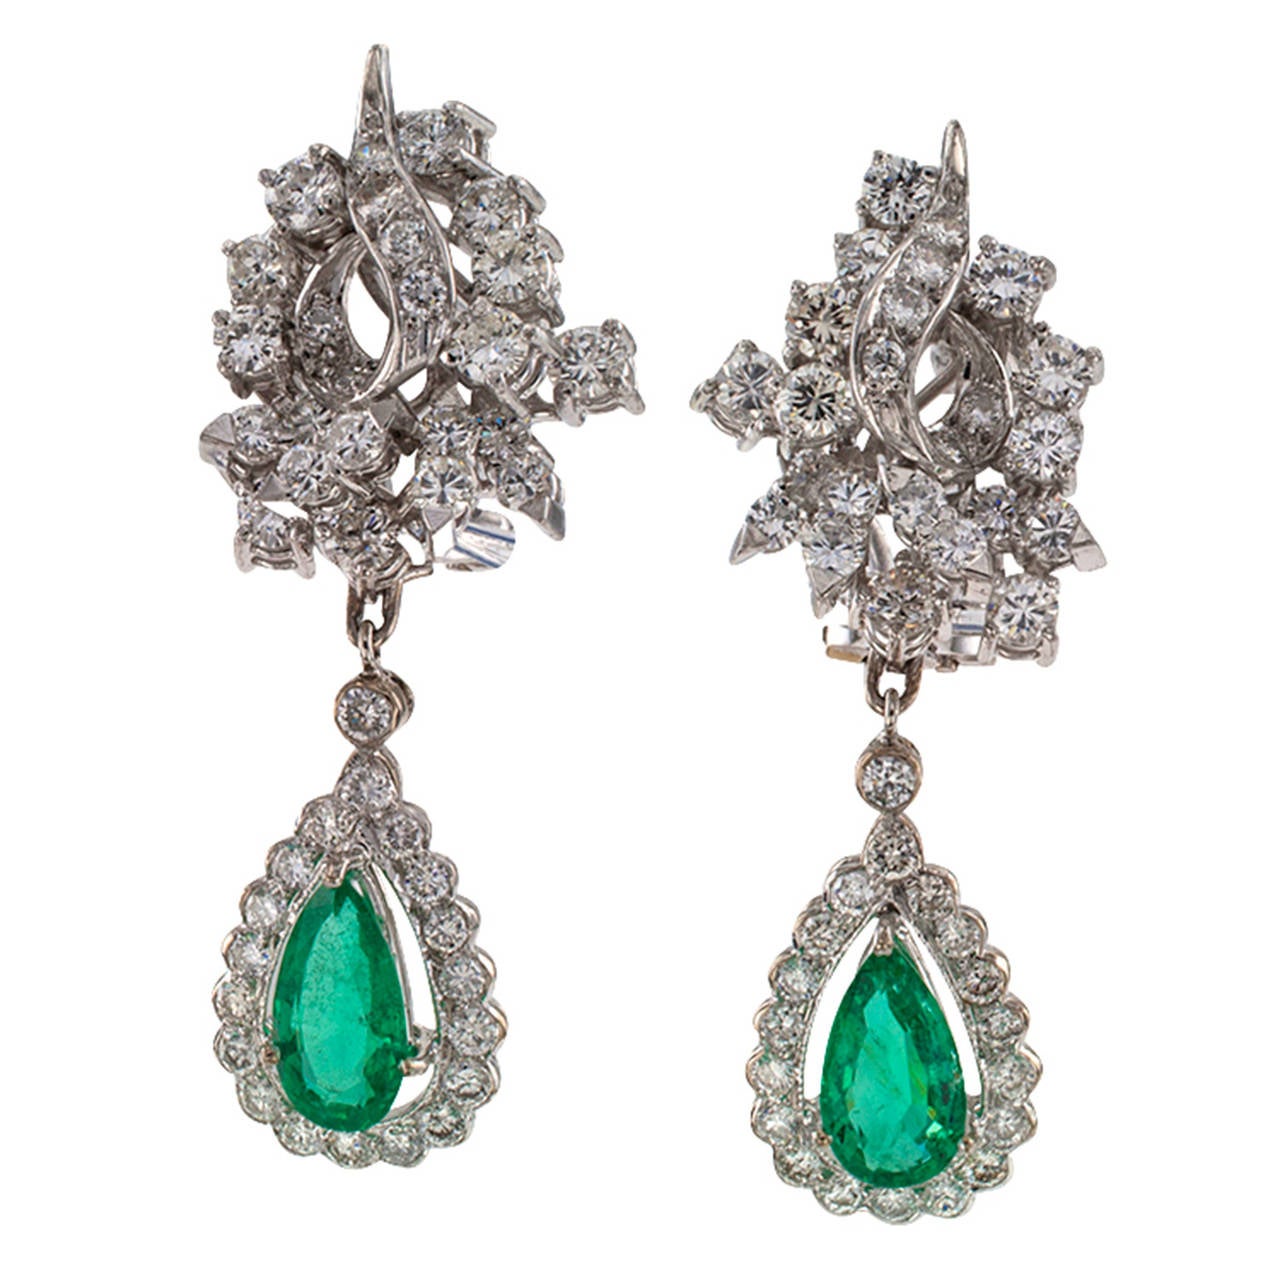 Emerald Diamond Gold Earrings

The articulated surmounts are designed as elegant and sculptural scrolling motifs that are literally brimming with sparkling round brilliant-cut diamonds, showcasing, within their conforming and pendent diamond